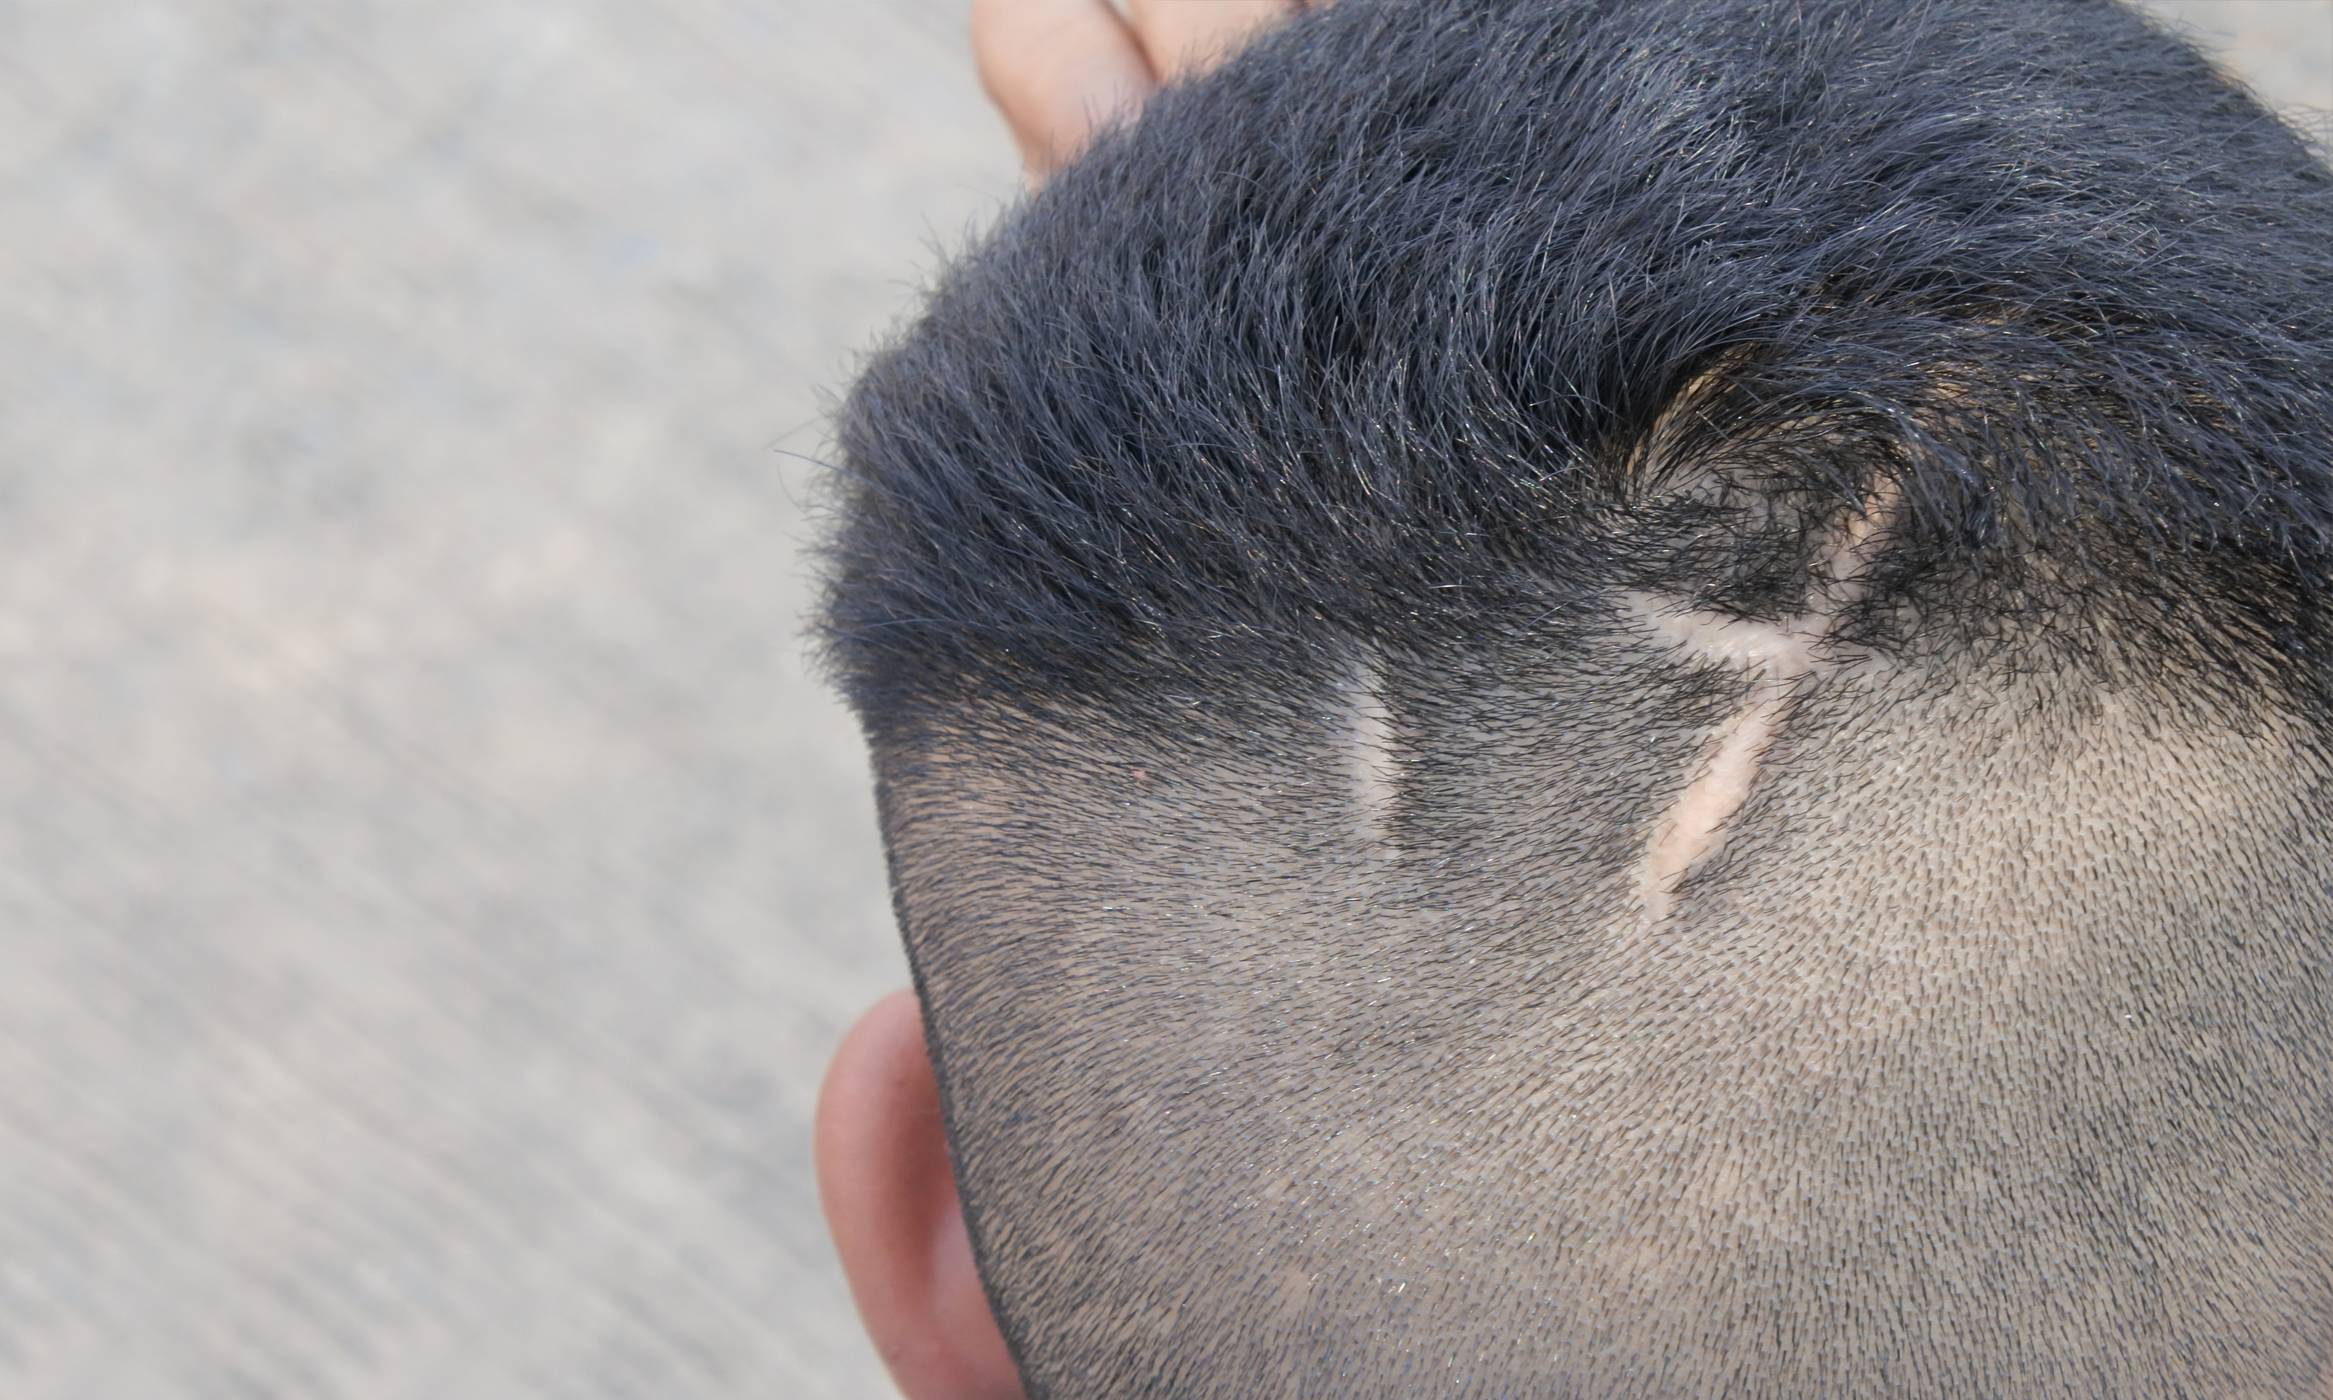 Close-up of a man’s scalp, who is a good candidate for scar revision either through treatment or hair transplant procedure